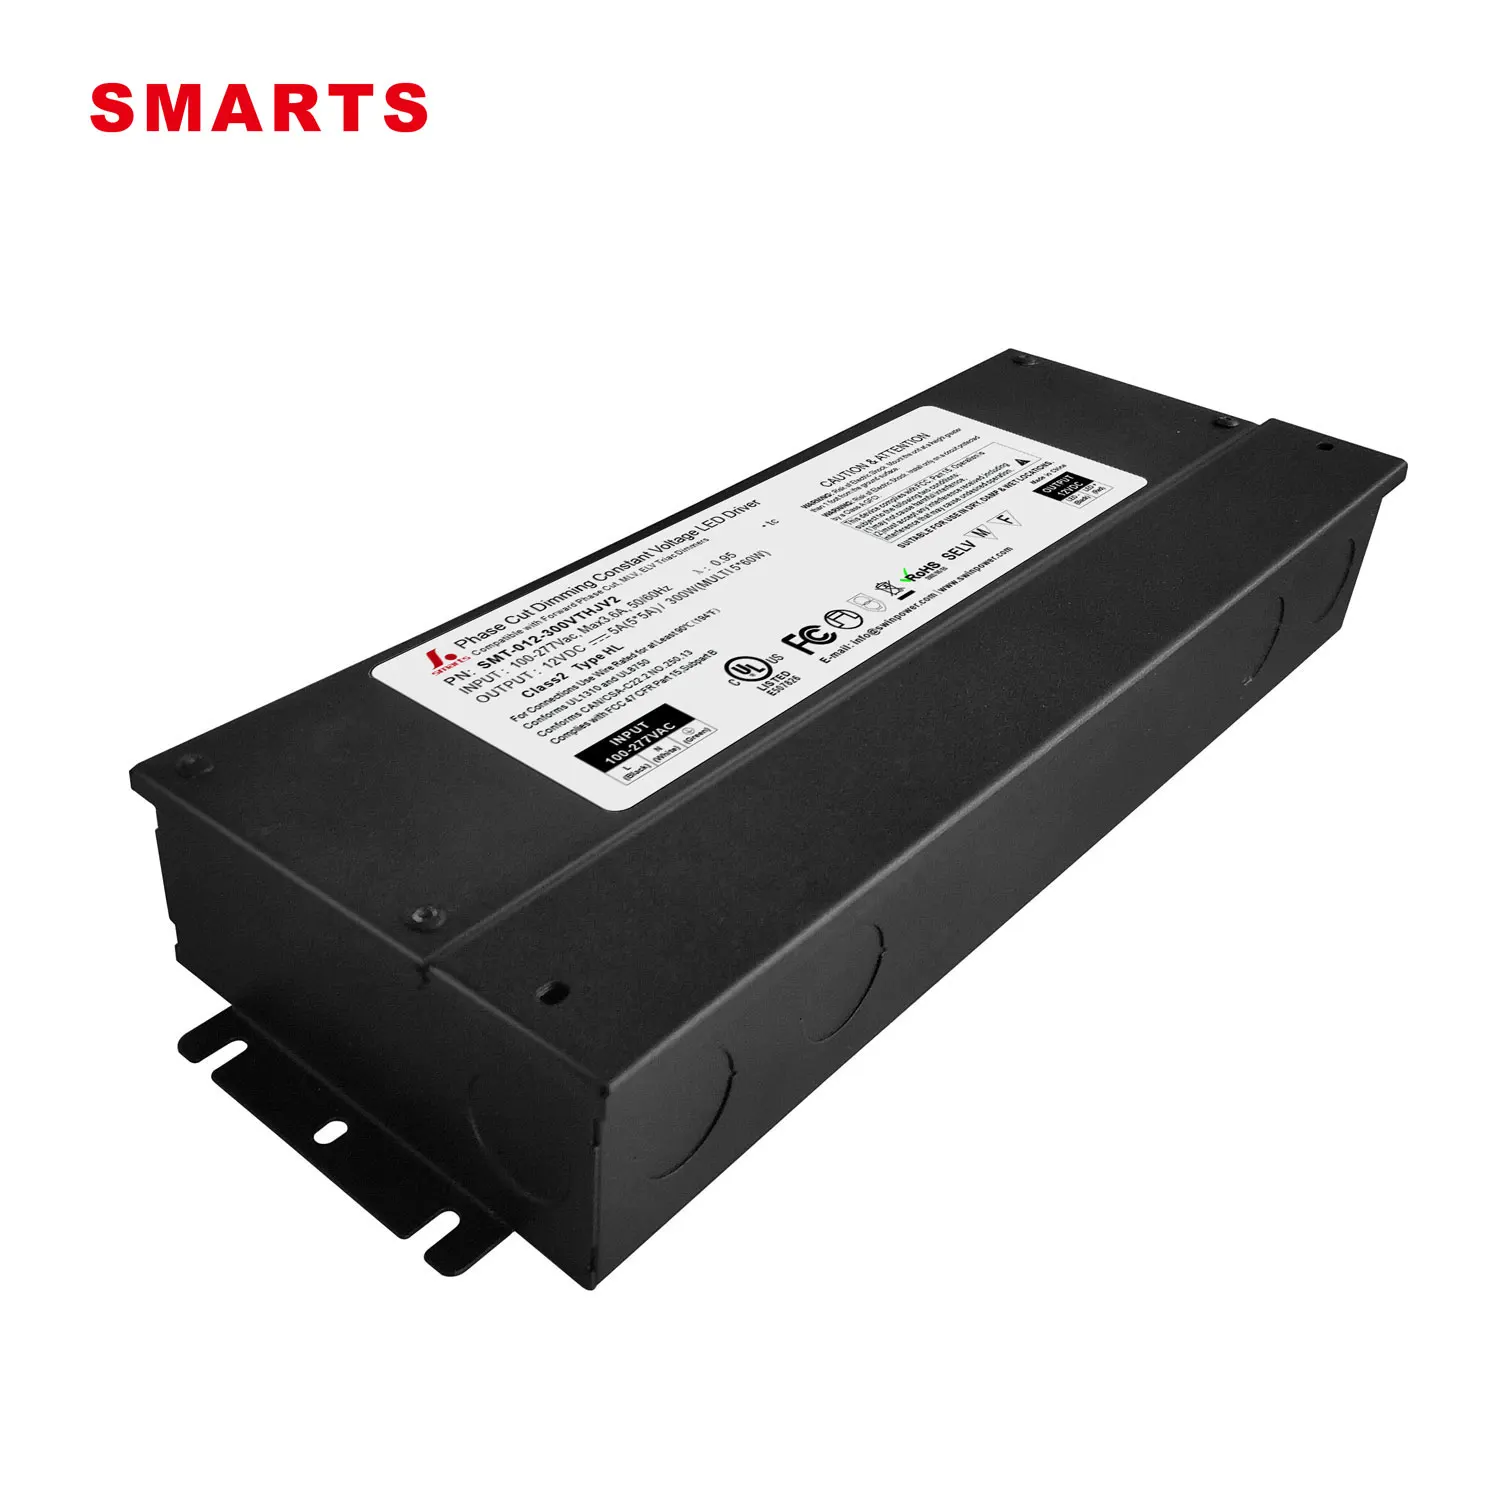 multi output 300watt dimmable power supply led driver 12v 300w waterproof for wet location